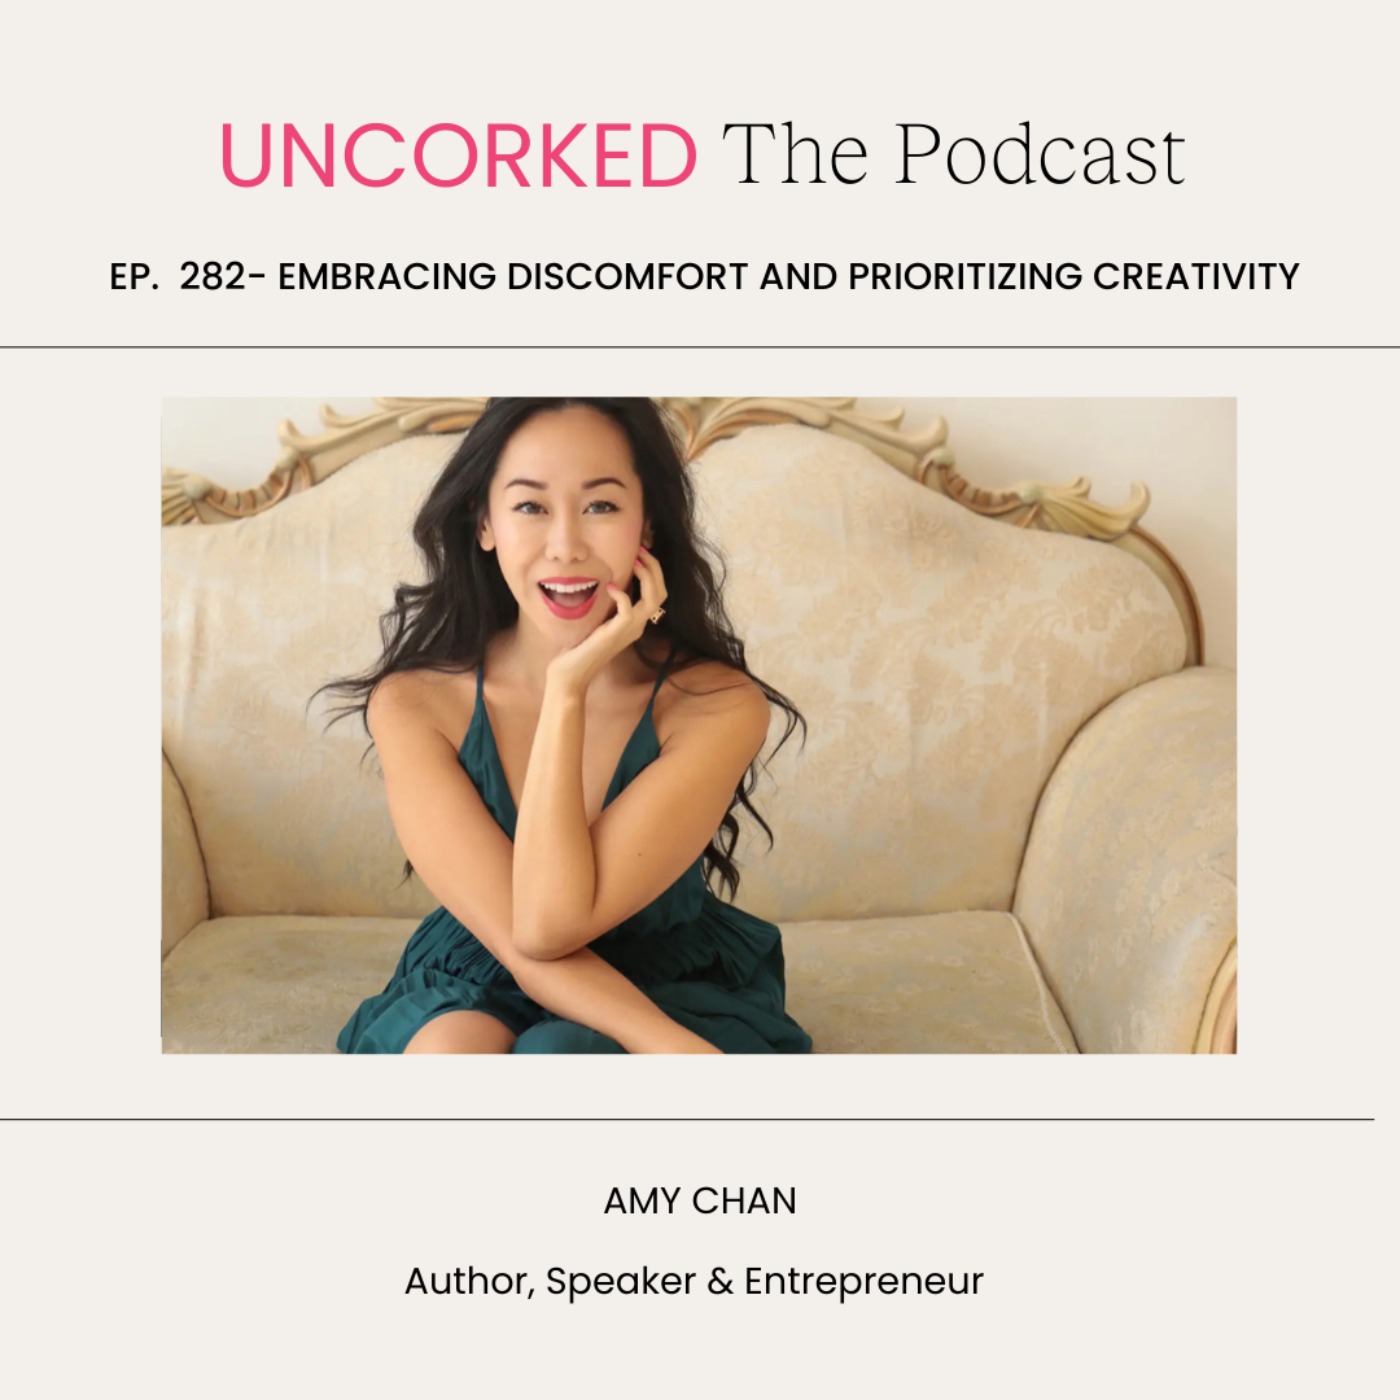 Embracing Discomfort and Prioritizing Creativity with Amy Chan